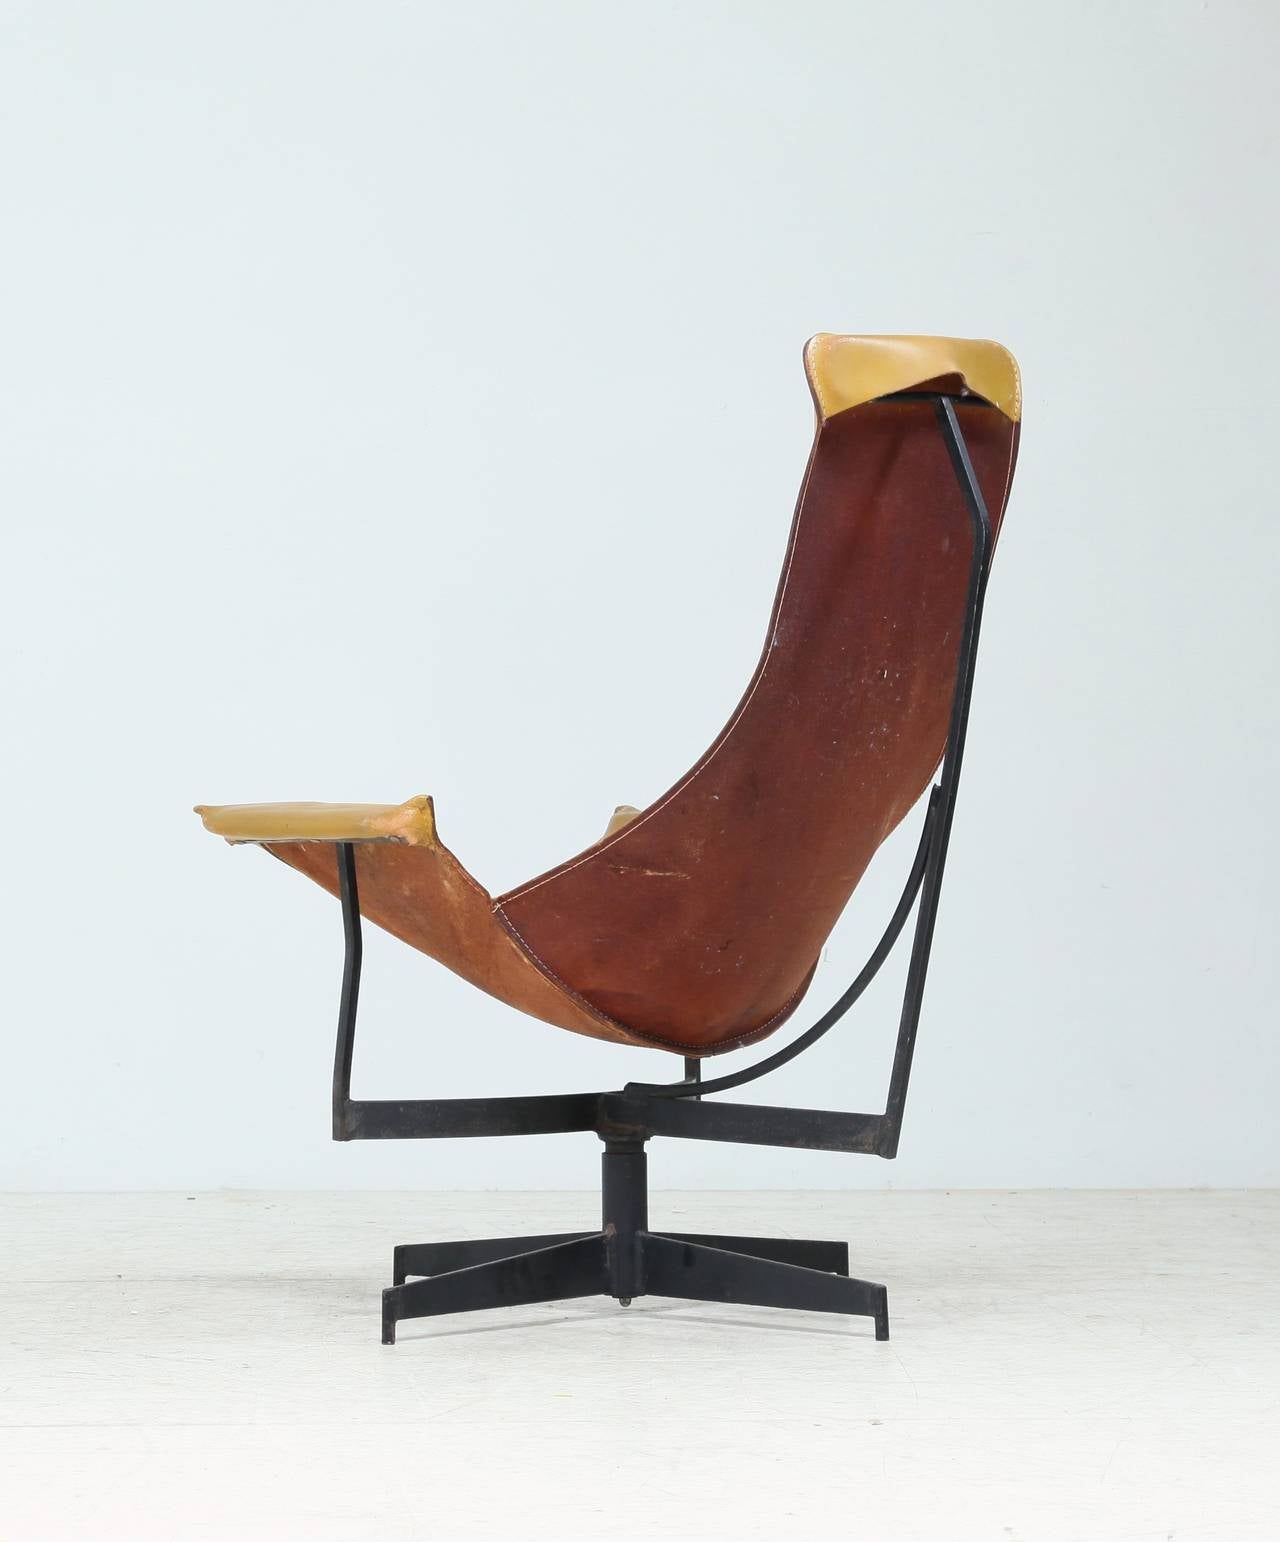 American Leather Crafter Lounge Chair in Brown